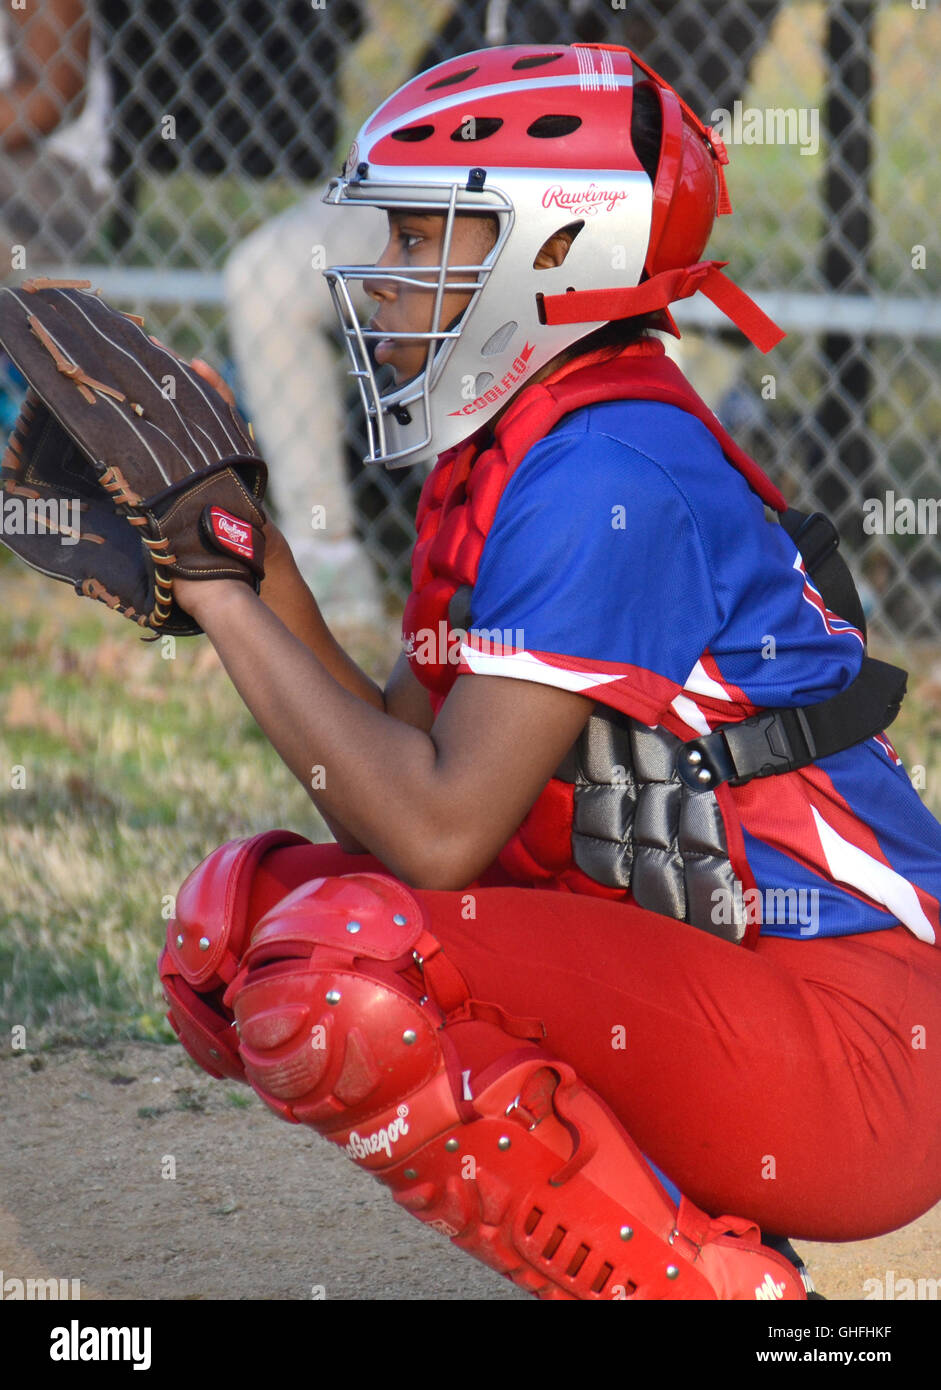 Catcher in a softball game Stock Photo